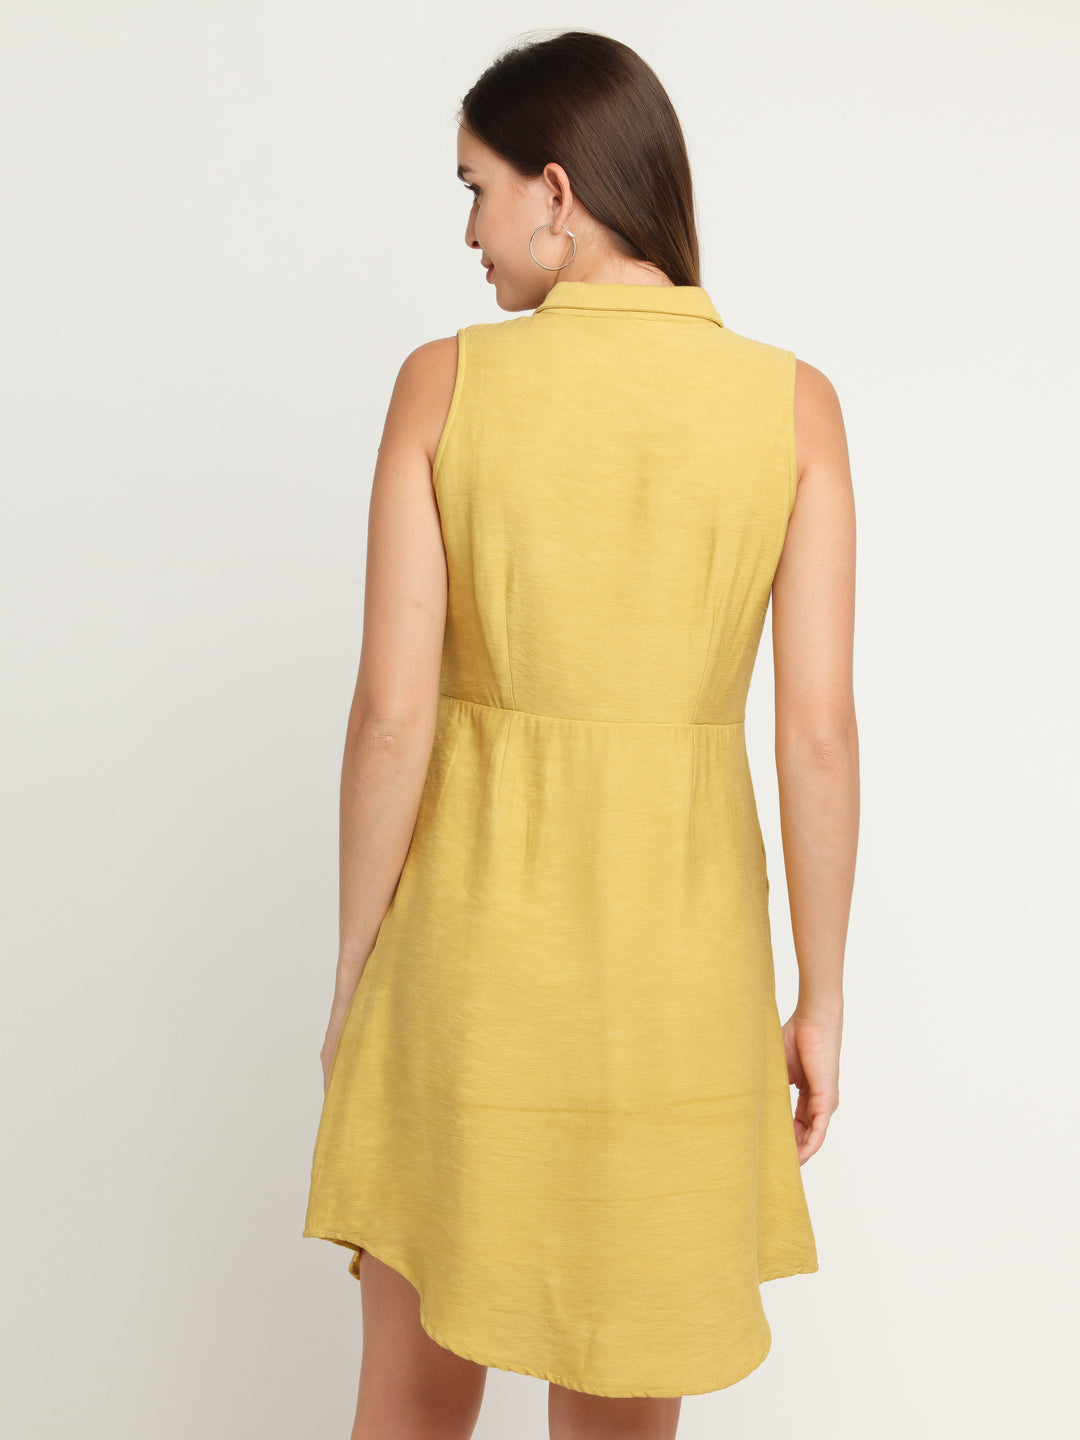 Yellow Solid Short Dress For Women